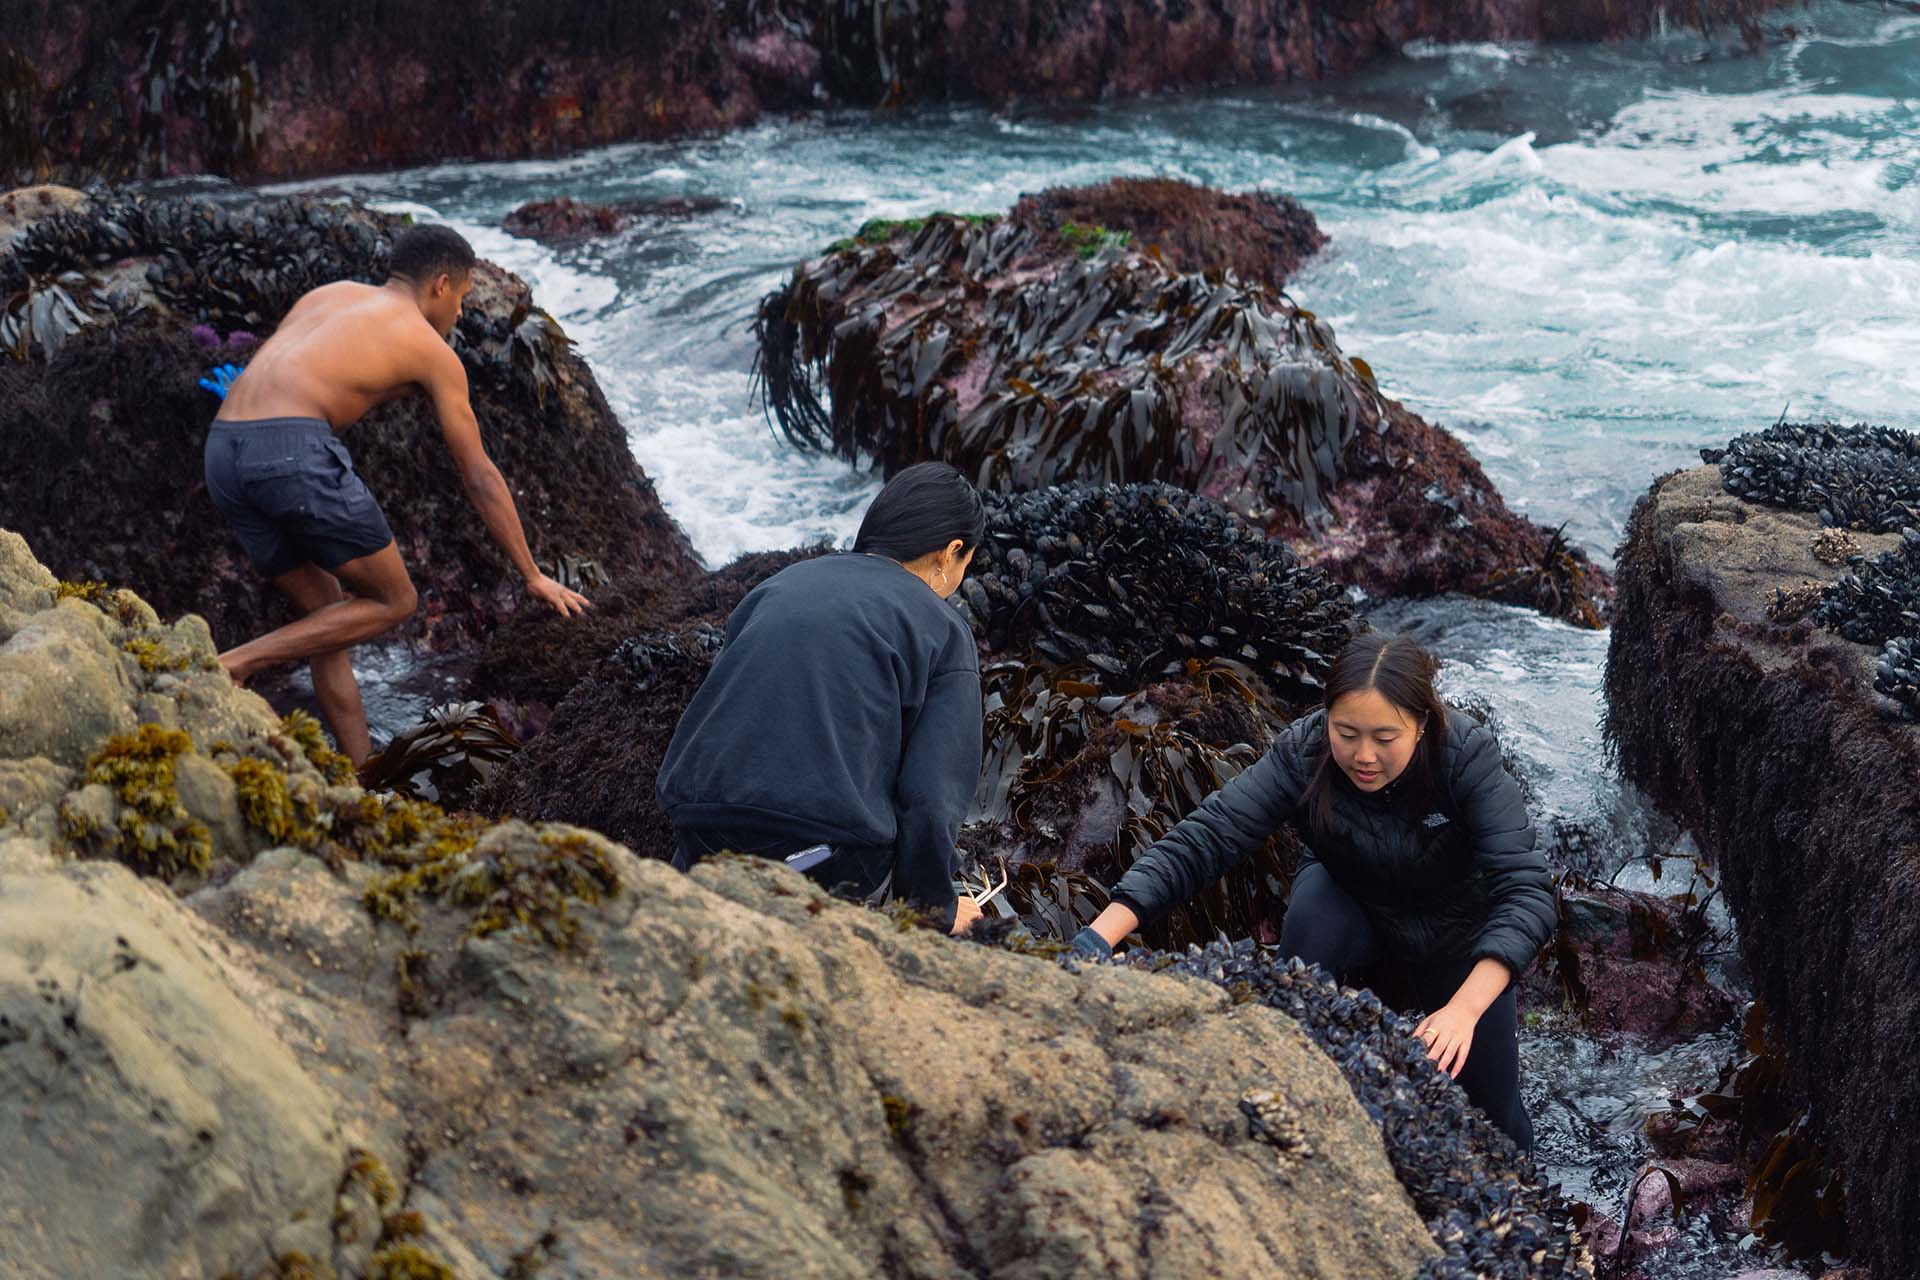 Three people stand in a tidepool searching among the rocks and kelp for live sea urchins.